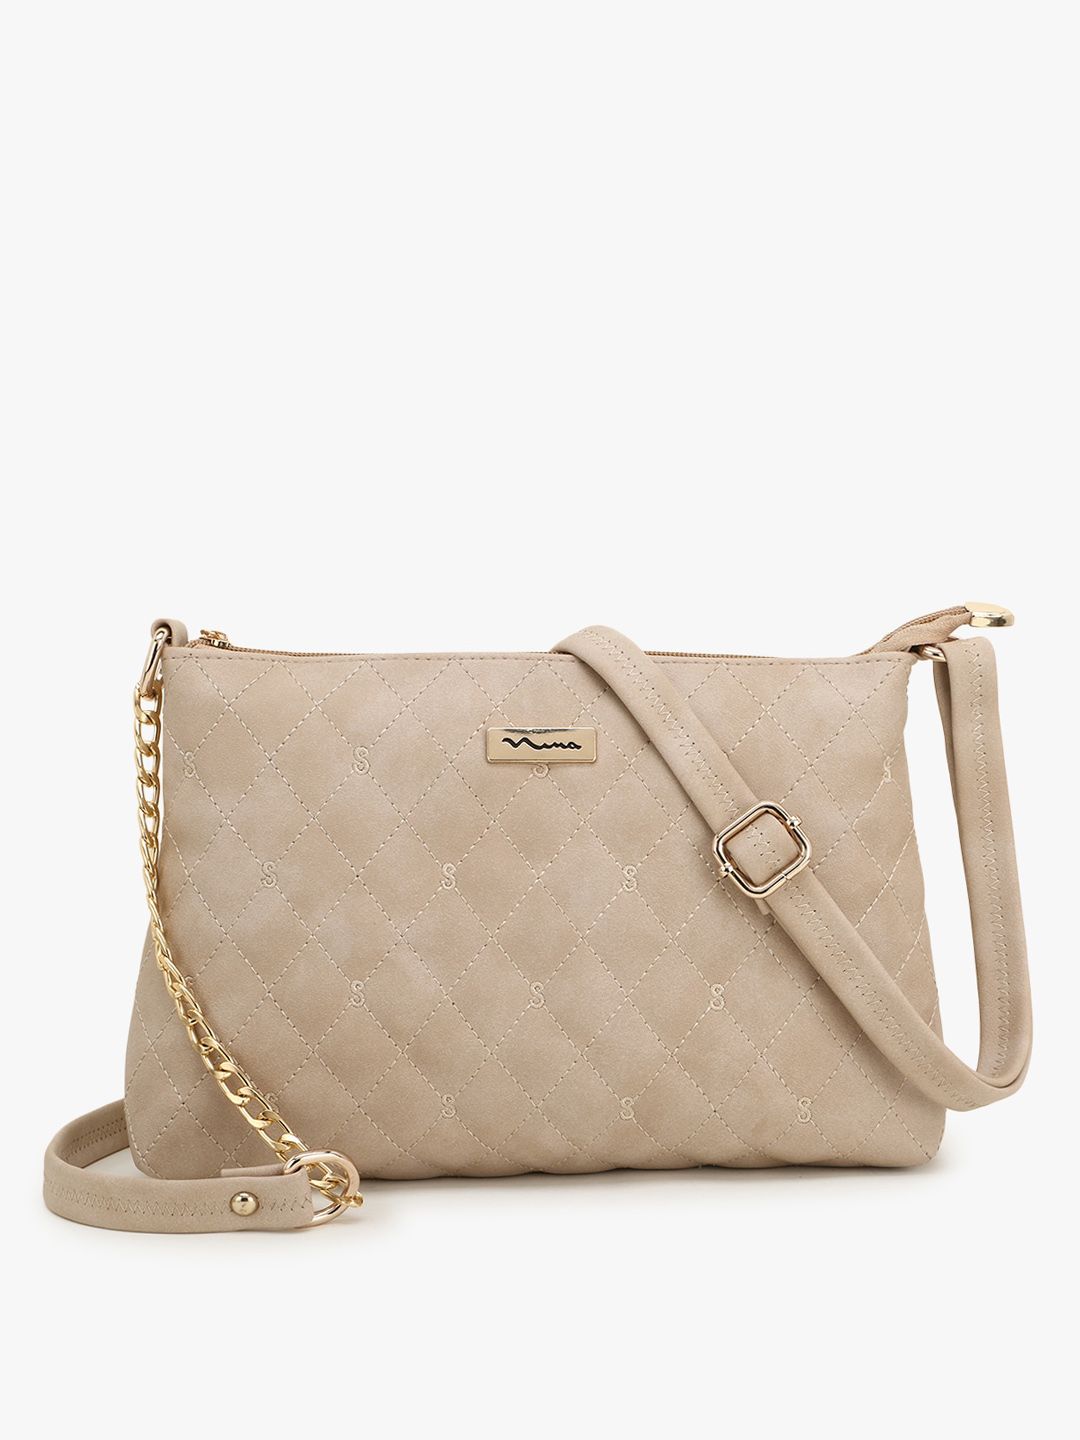 SHINING STAR Cream-Coloured Textured PU Structured Sling Bag with Quilted Price in India